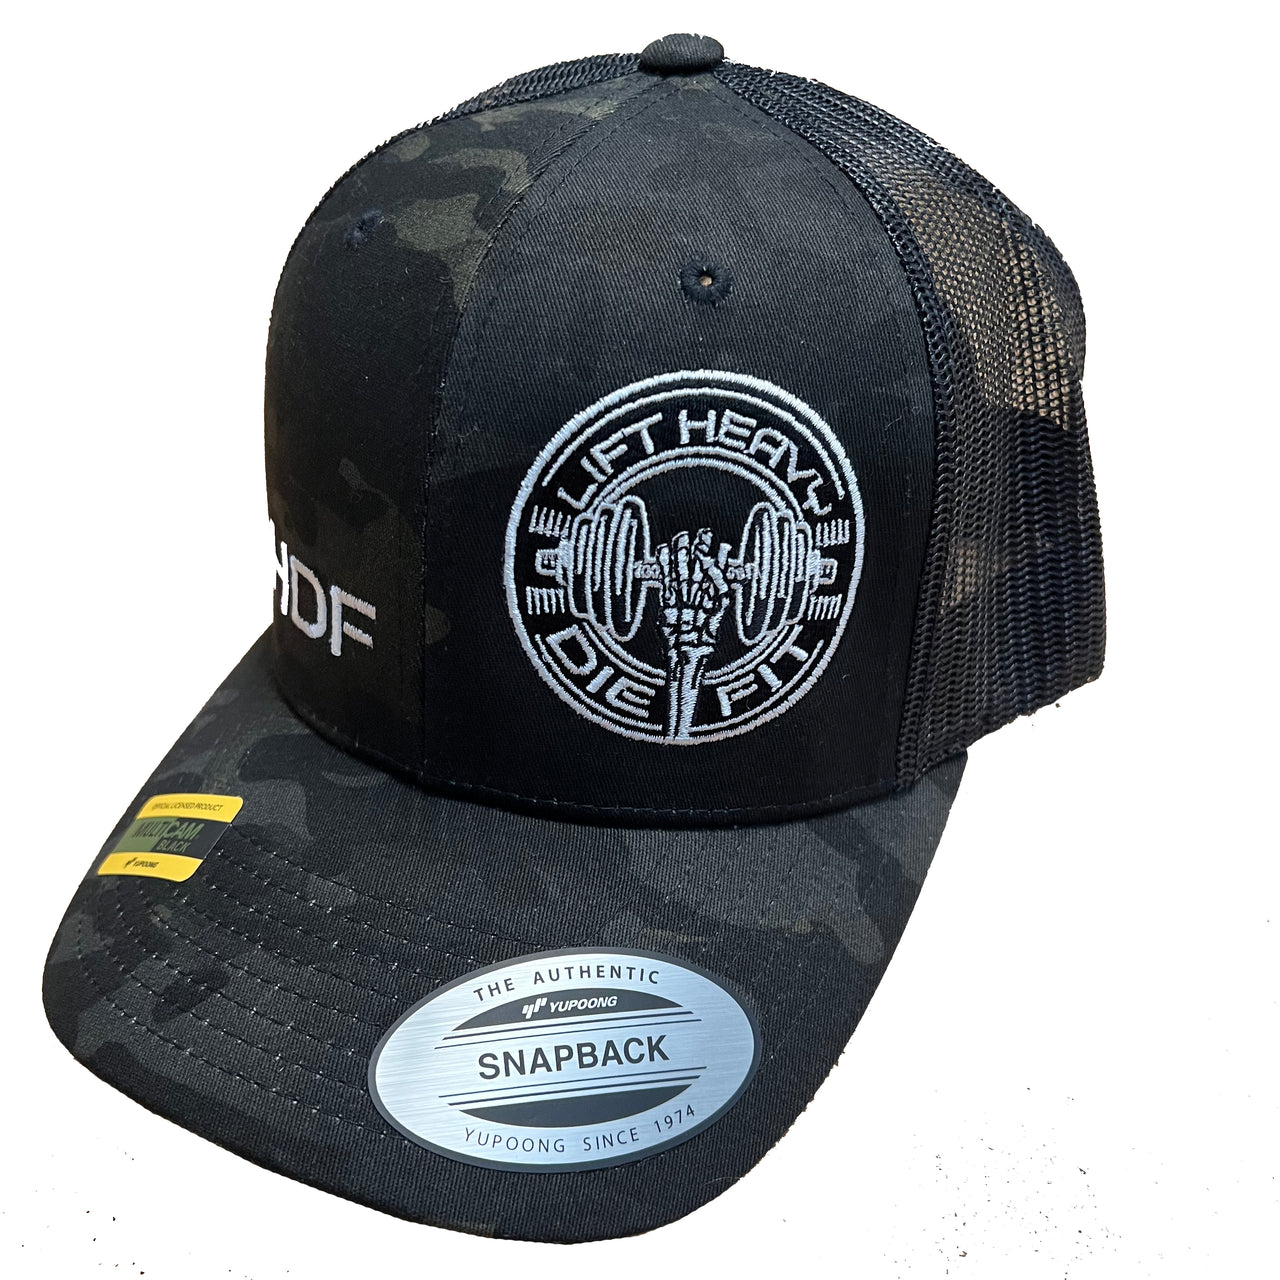 Lift Heavy Die Fit Embroidered Trucker Cap